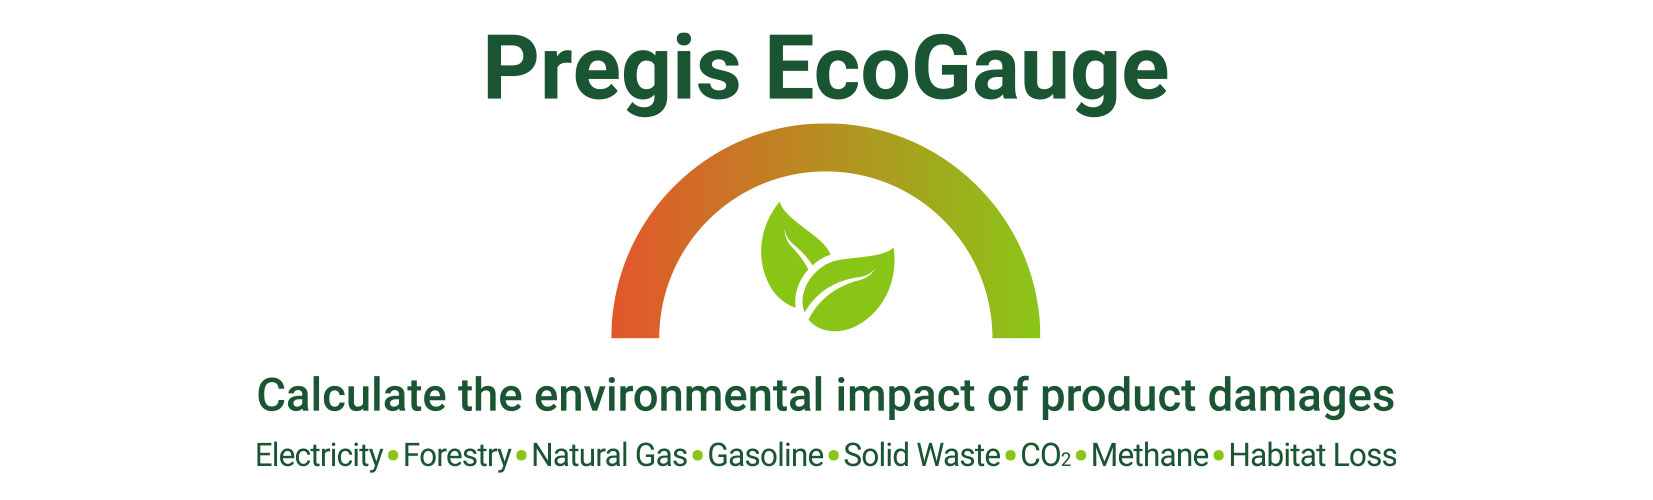 Gauging Your Greenness: The EcoGauge App Lets Shippers Calculate Environmental Impact of Damaged Products